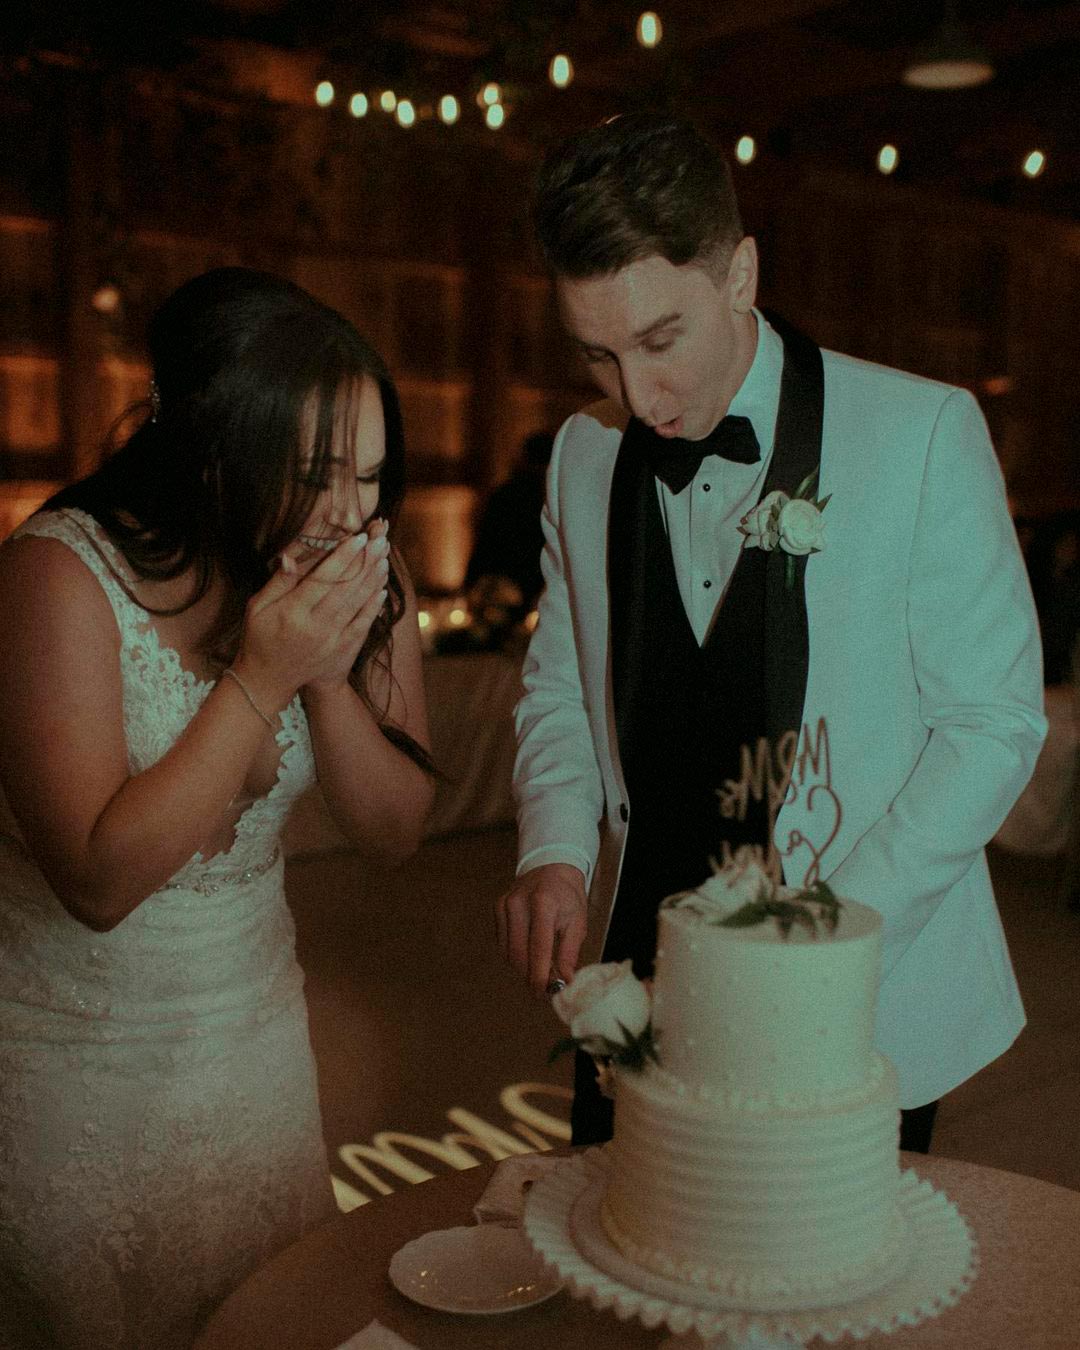 order of dances at a wedding cake cutting